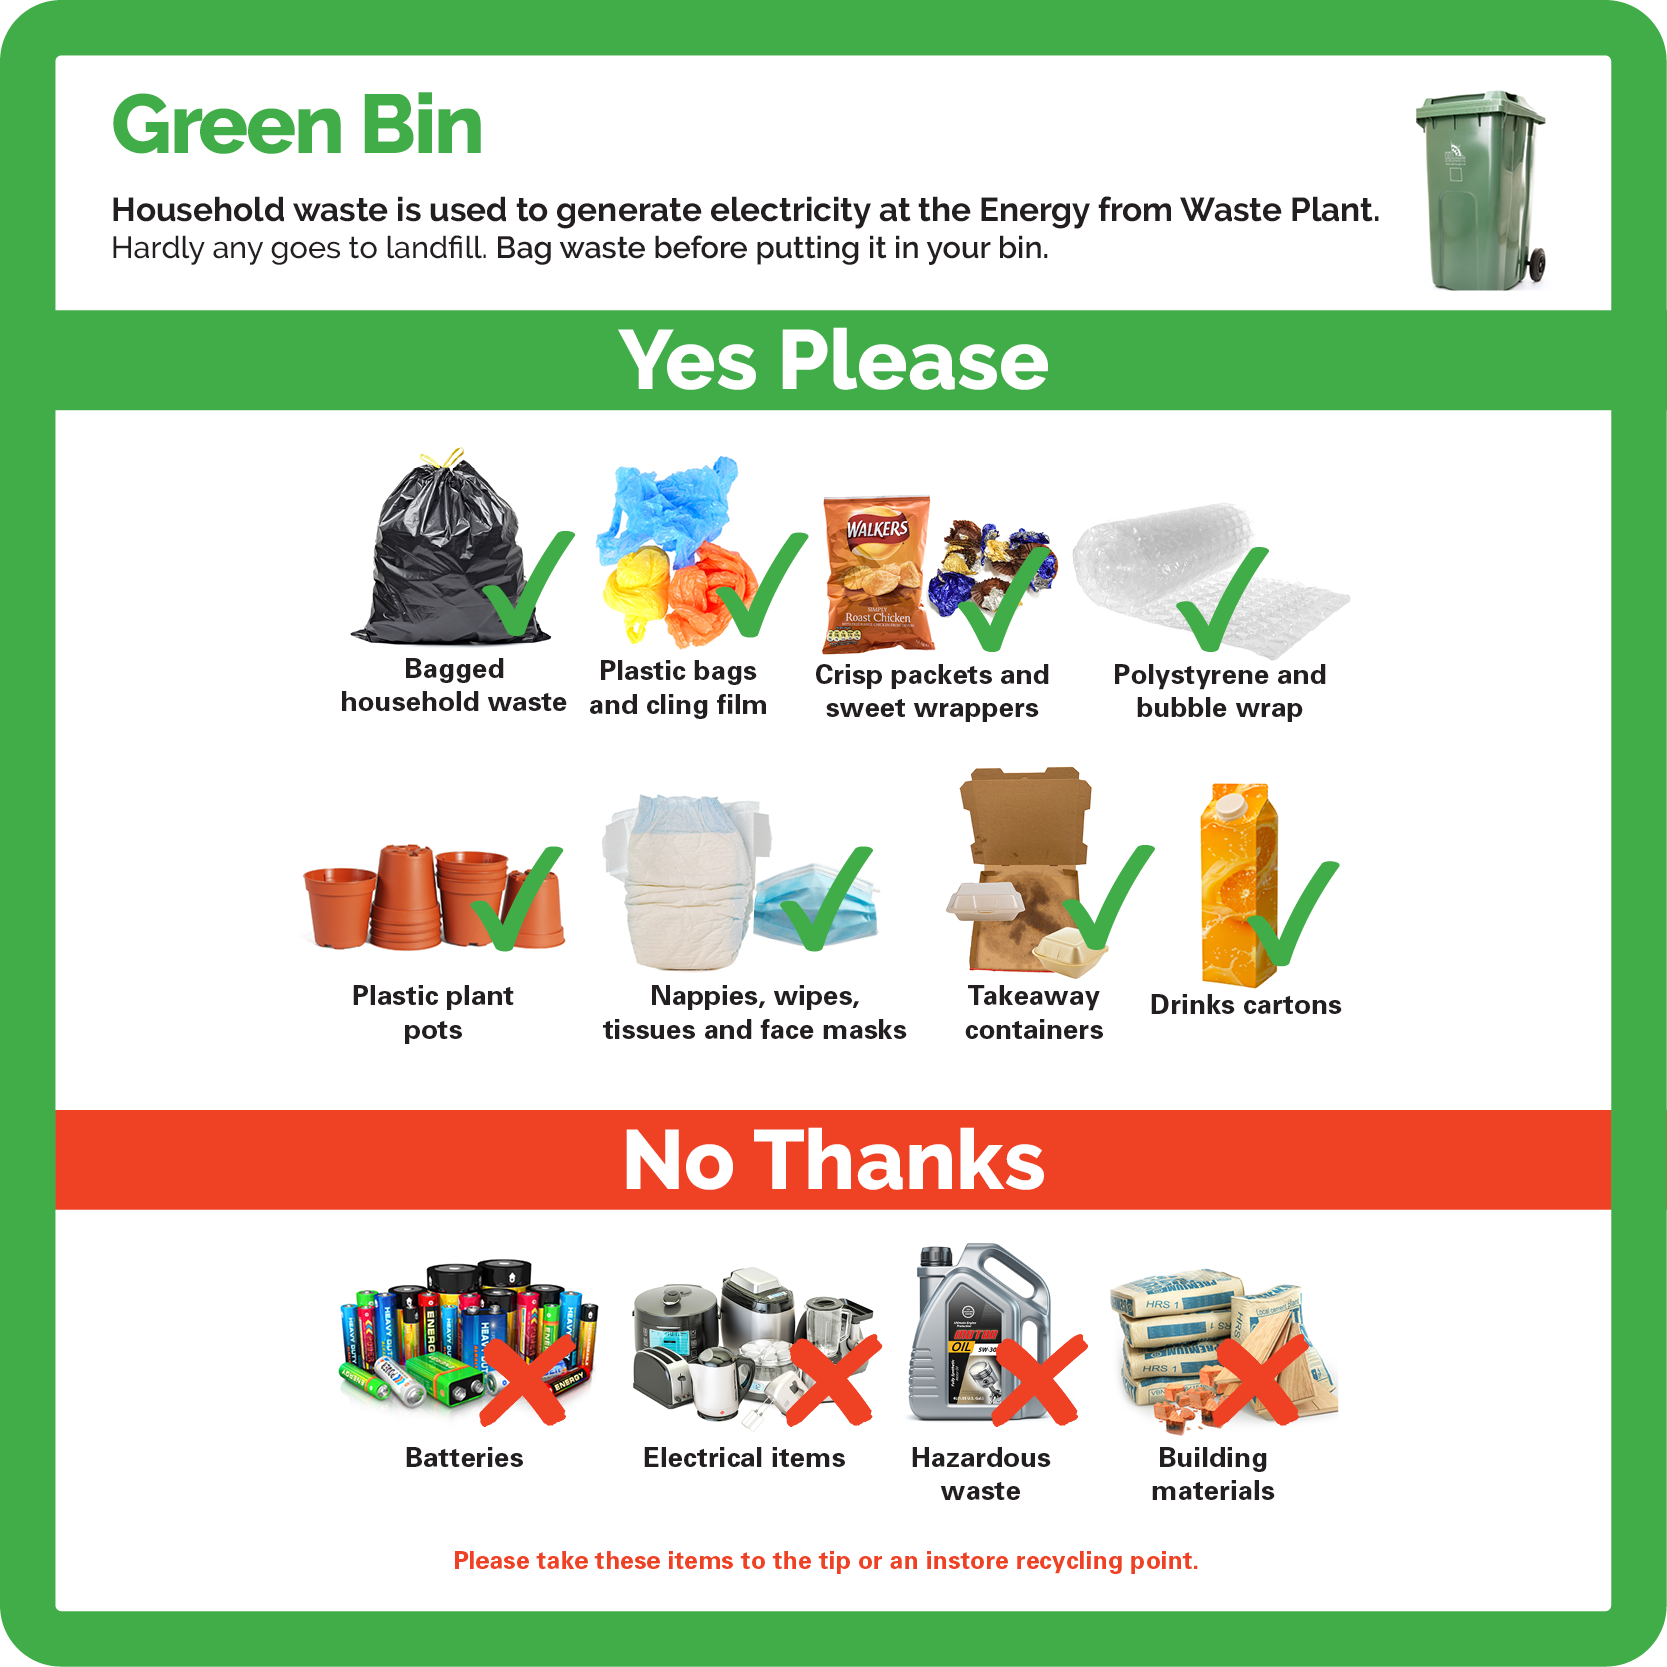 An image showing items that go in the green bin.